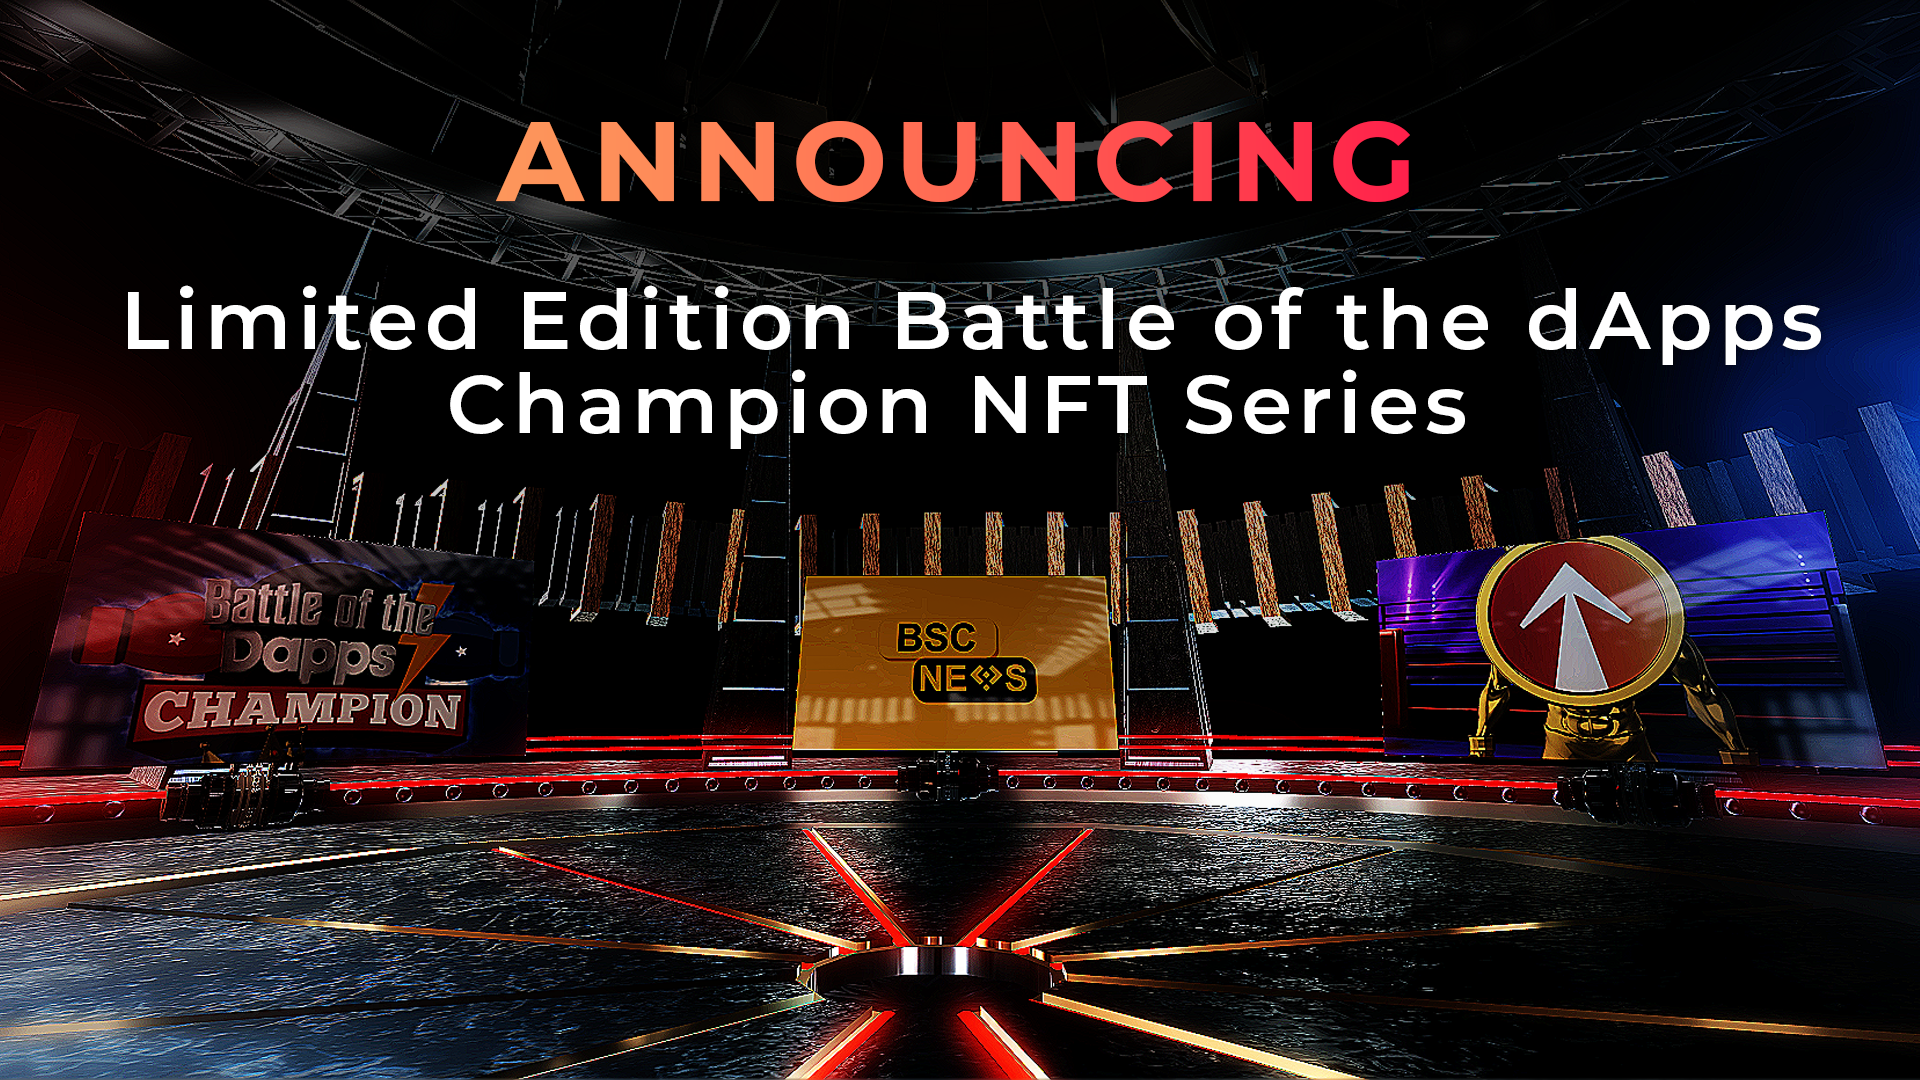 Preview Announcing Limited Edition Battle of the dApps Champion NFT Series